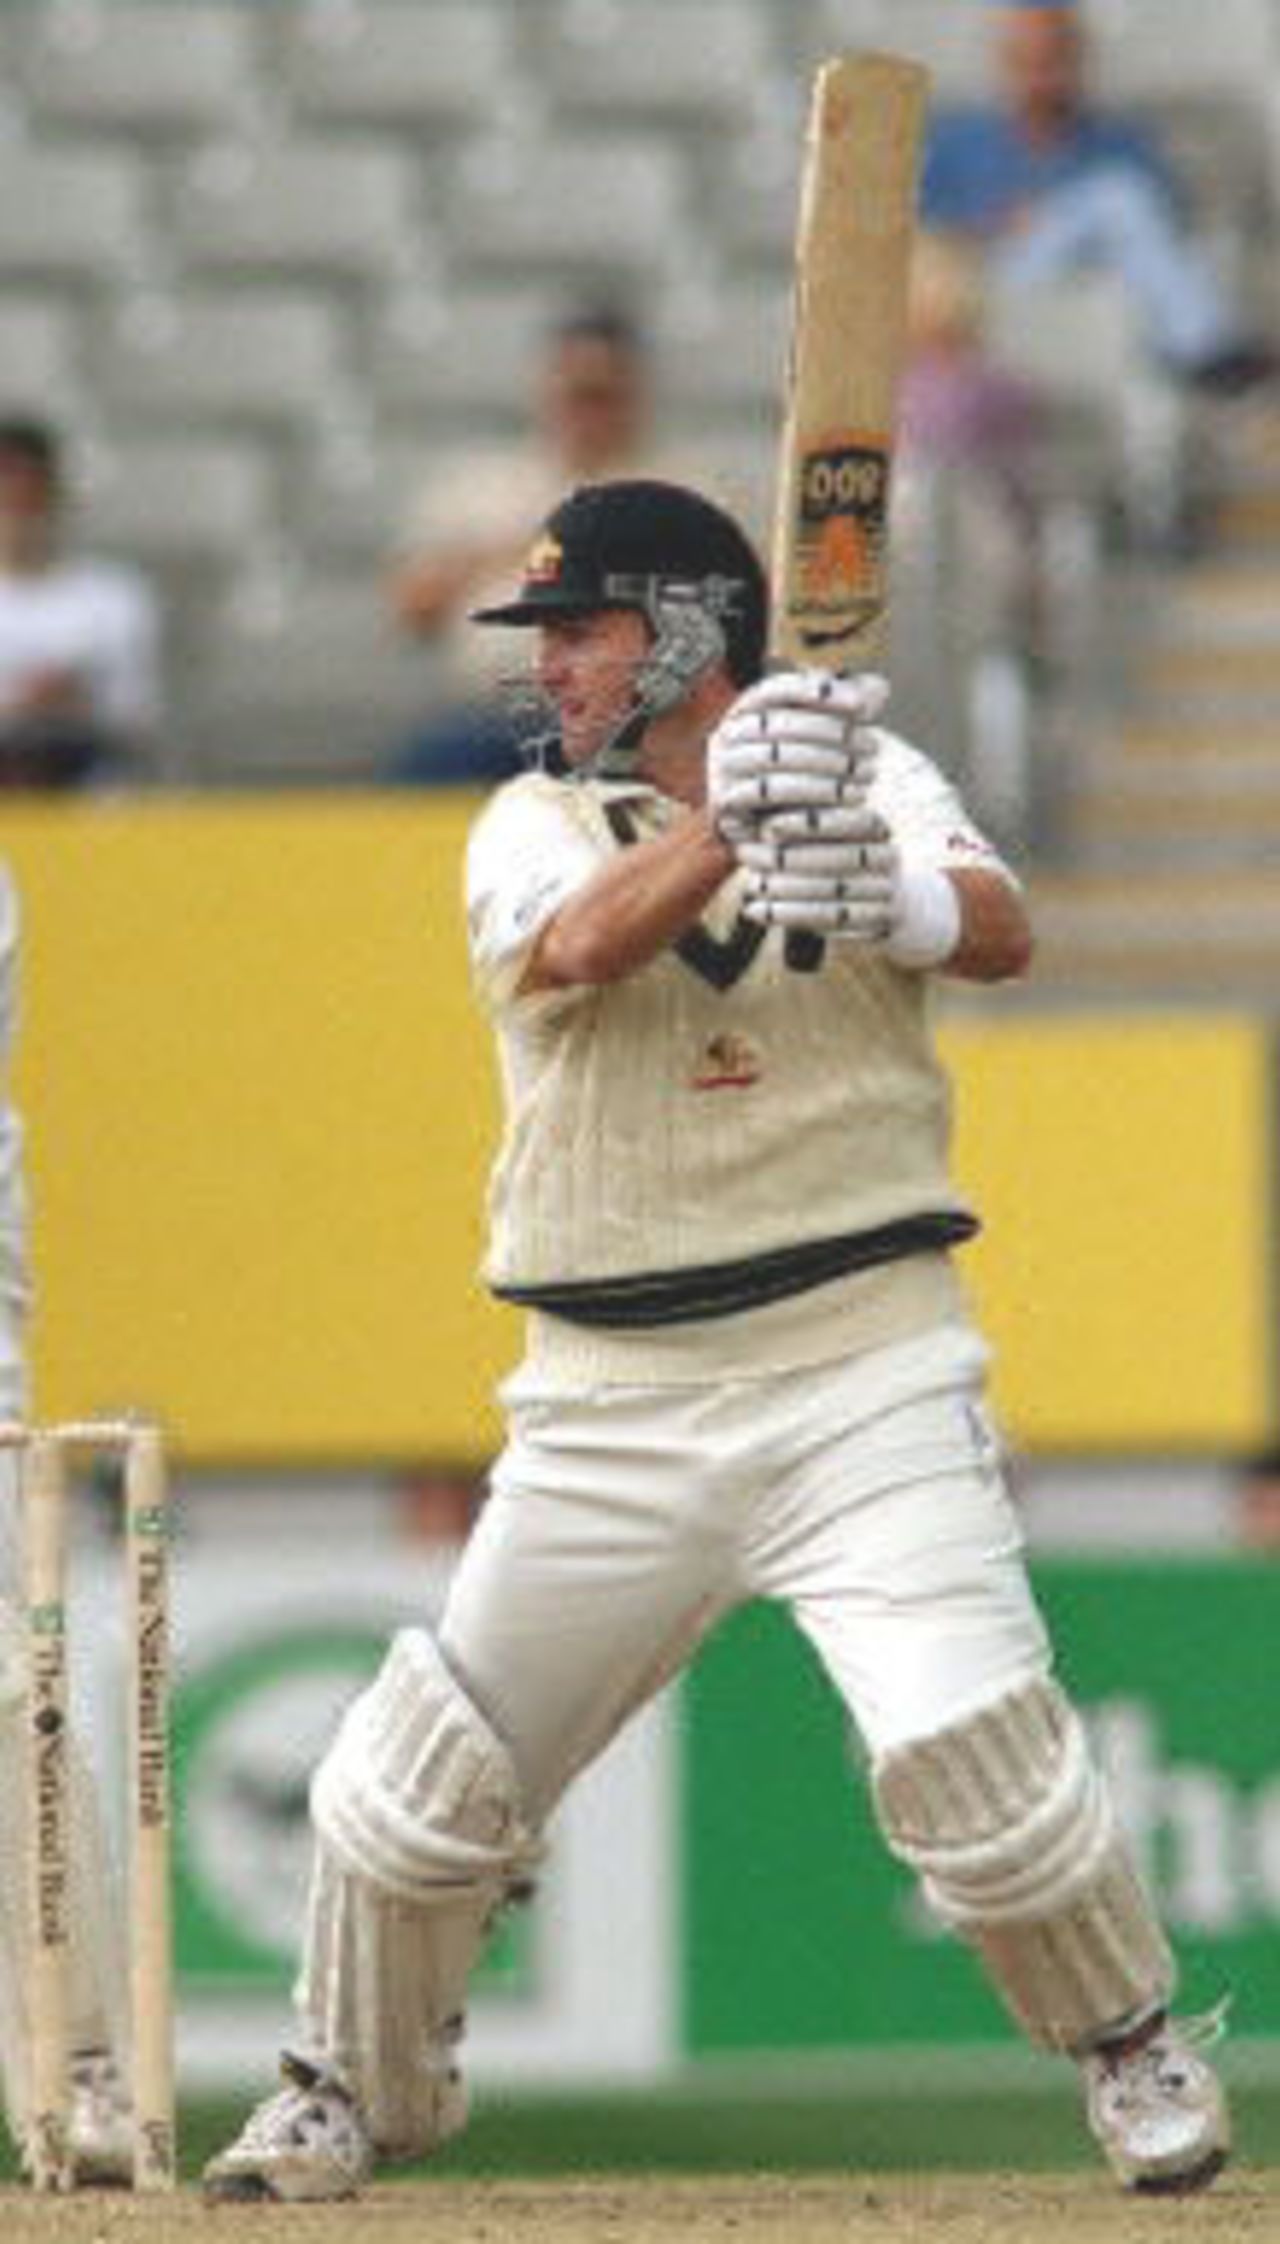 Australian batsman Mark Waugh cuts a ball through point on the way to topscoring for Australia against New Zealand on the first day of the first Test match being played at Eden Park in Auckland, 11 March 2000. Australia was dismissed for 214 in their first innings and in reply New Zealand is in trouble at 26-4 at stumps.